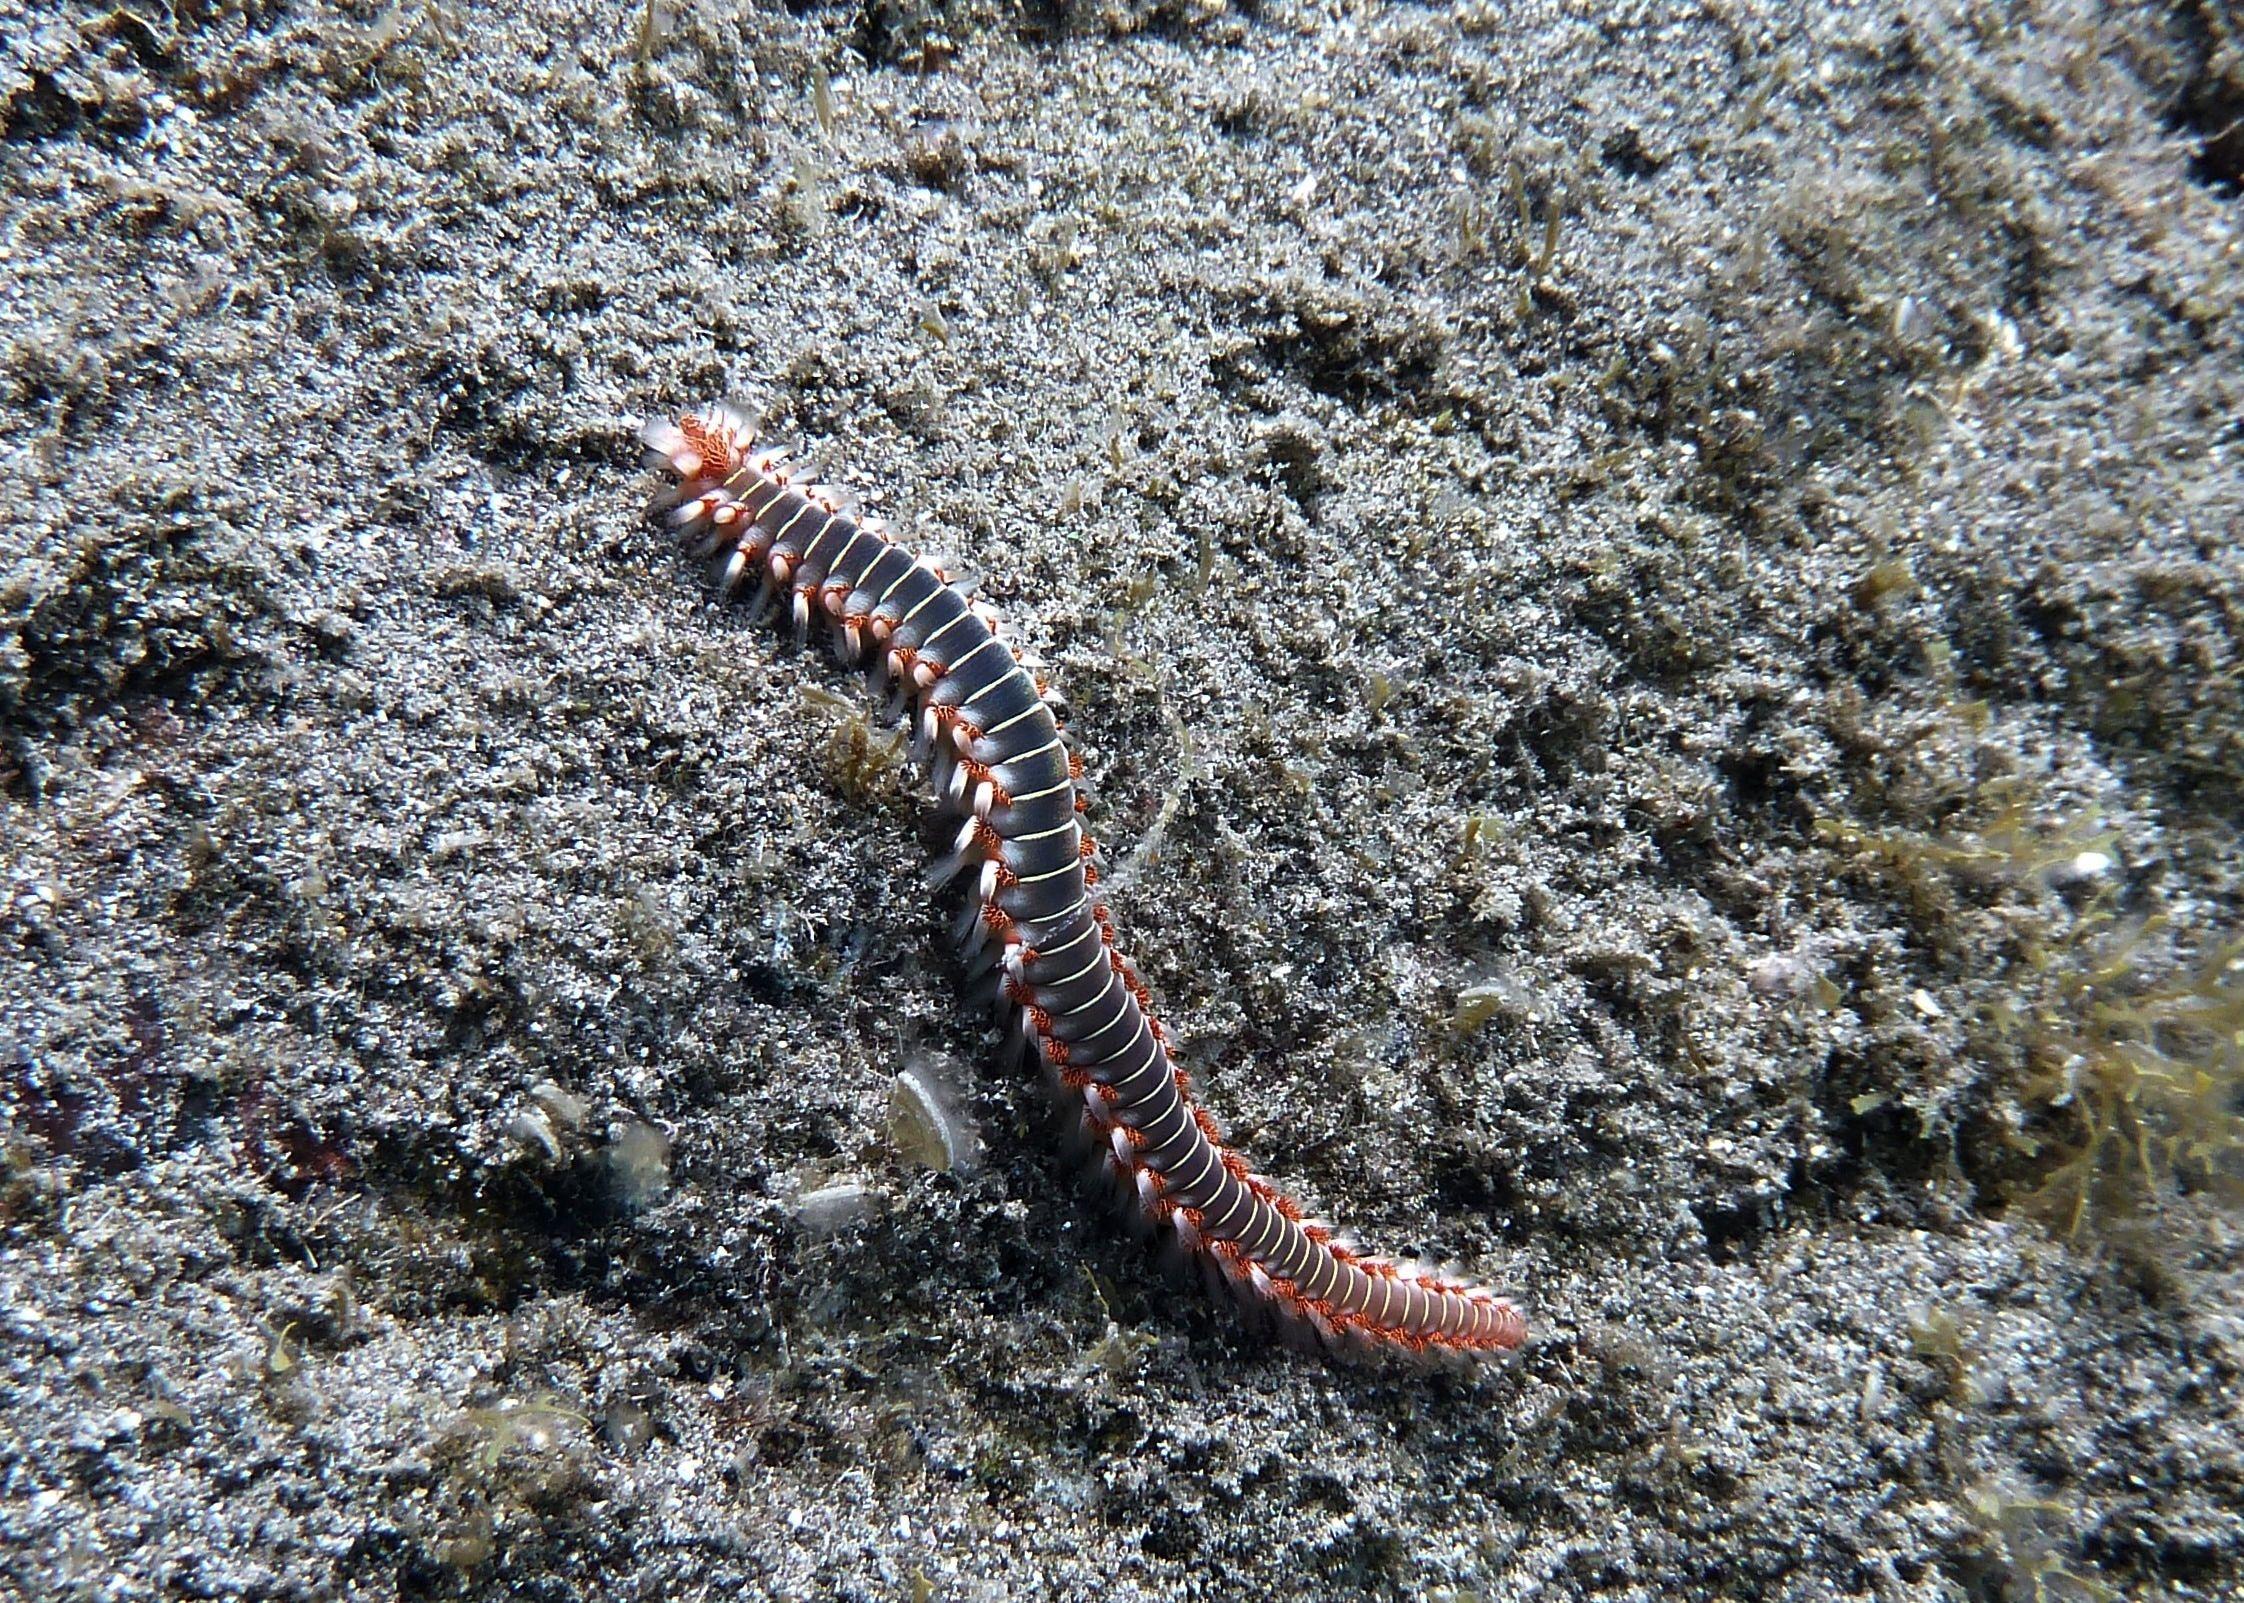 black and brown centipede free image